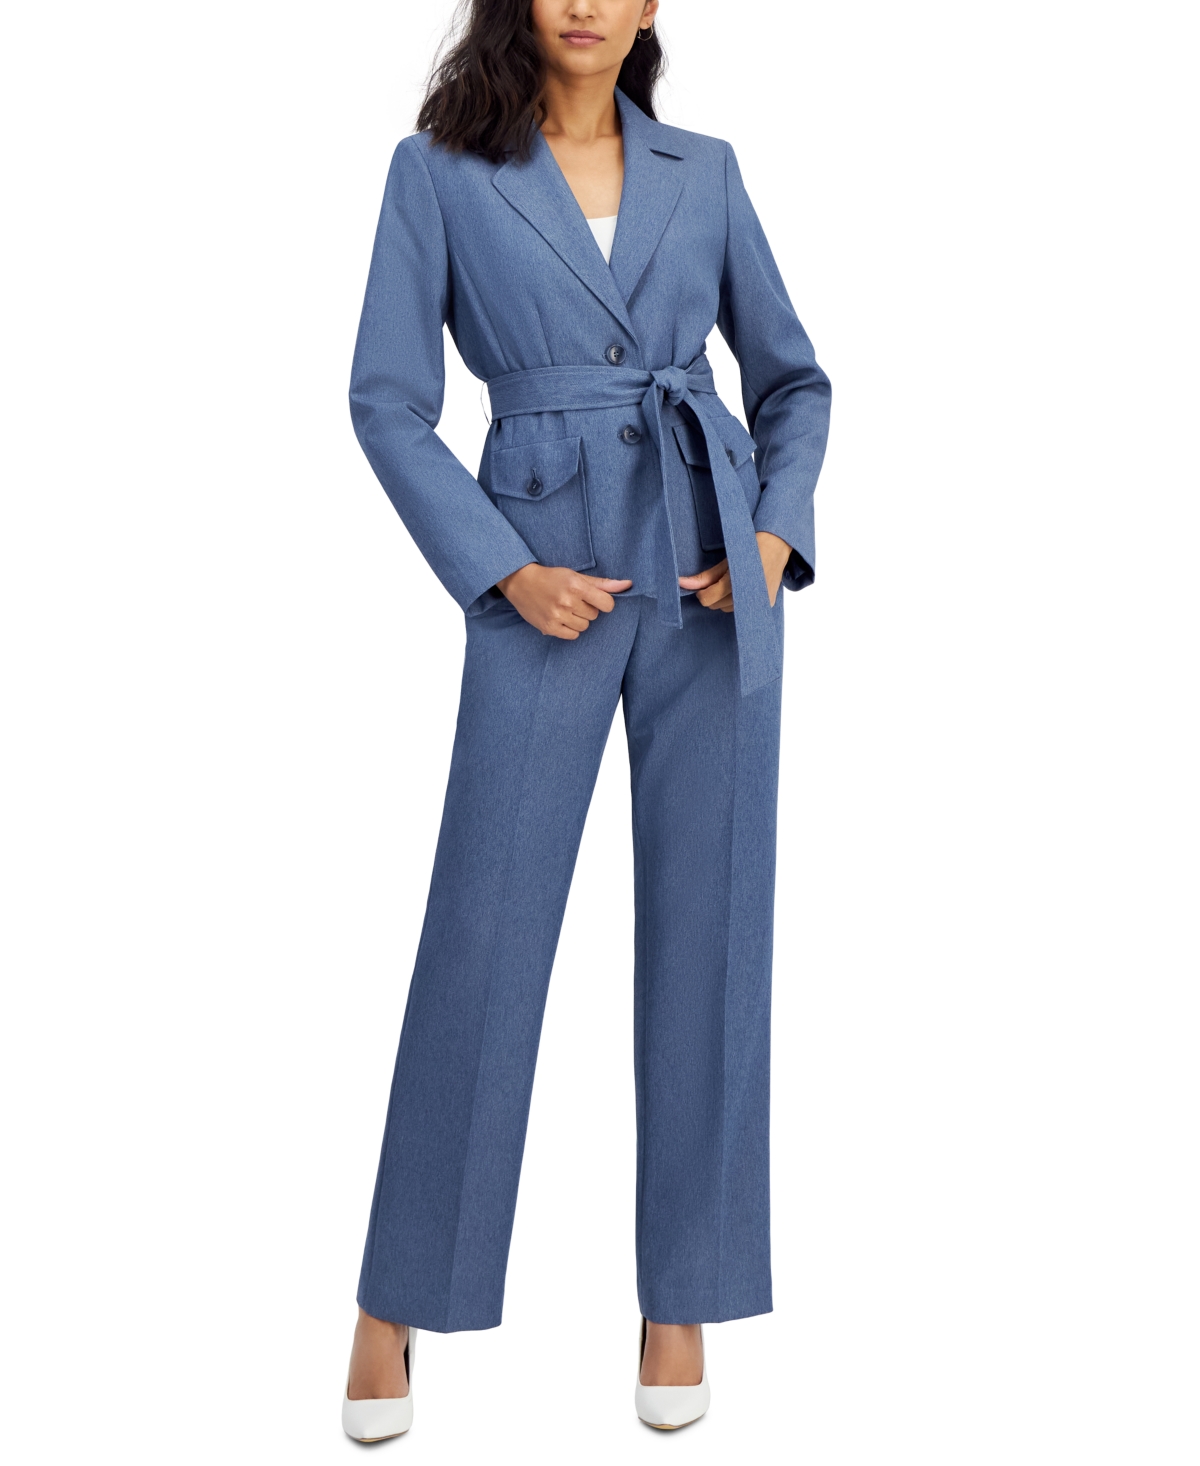 Le Suit Women's Belted Safari Jacket And Kate Pants, Regular & Petite Sizes In Light Blue Multi